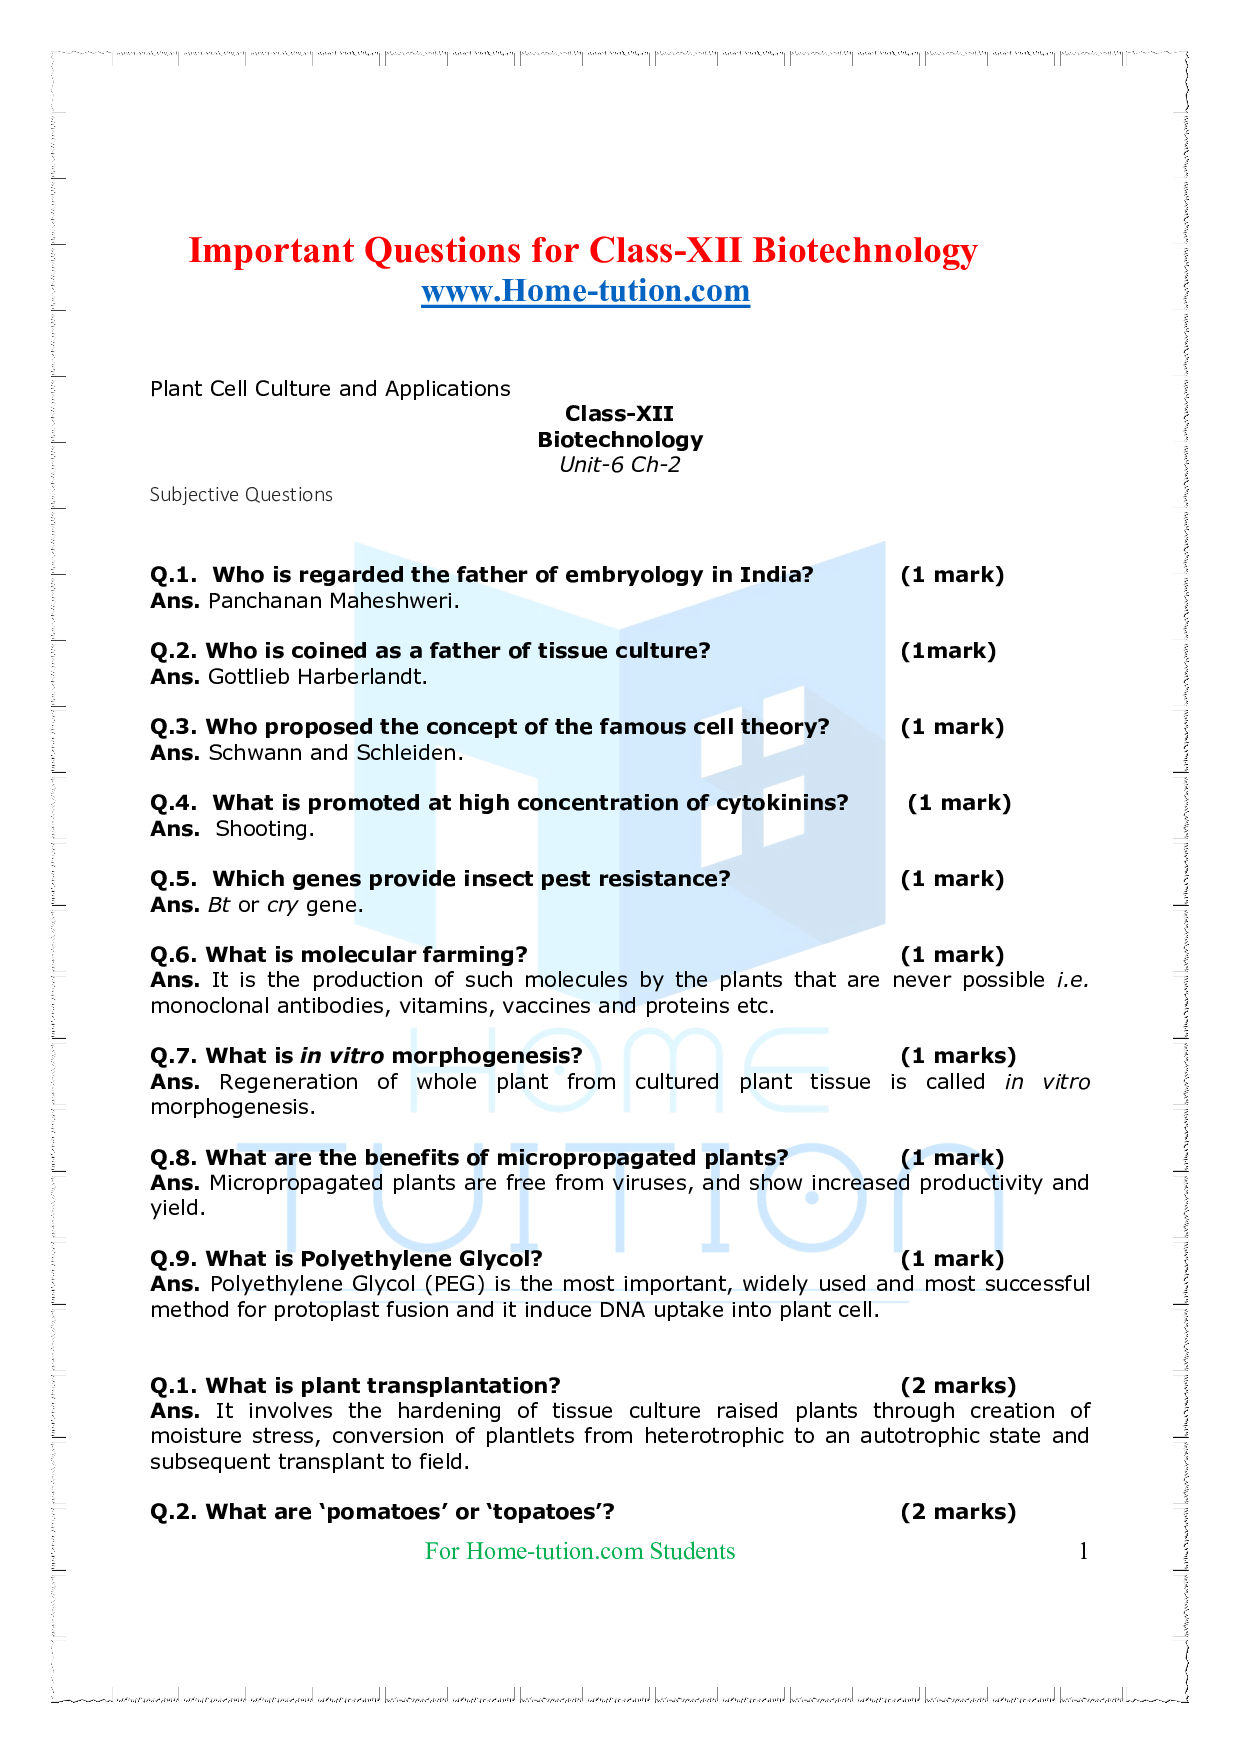 Chapter-Plant Cell Culture and Applications Questions